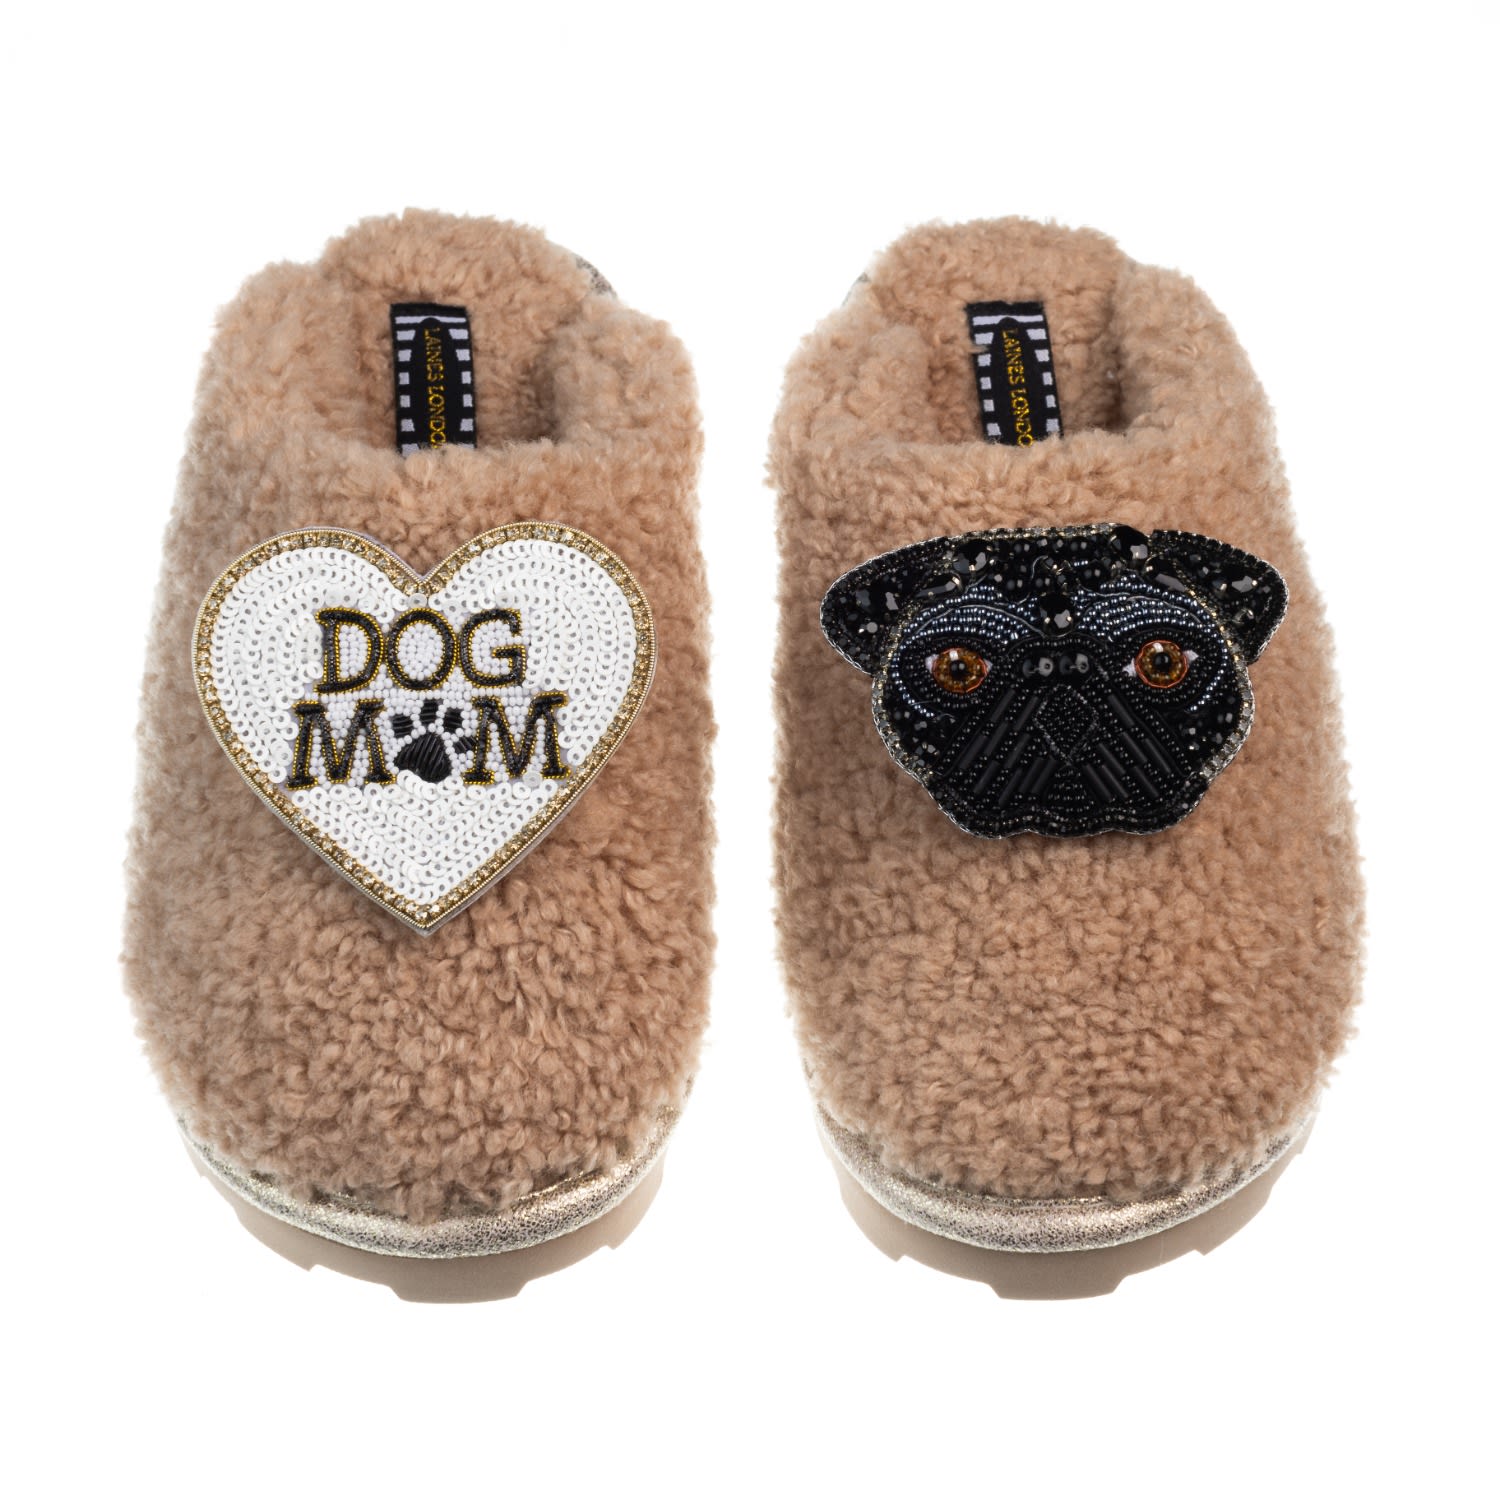 Laines London Women's Brown Teddy Closed Toe Slippers With Snoopy Pug & Dog Mum / Mom Brooches - Toffee